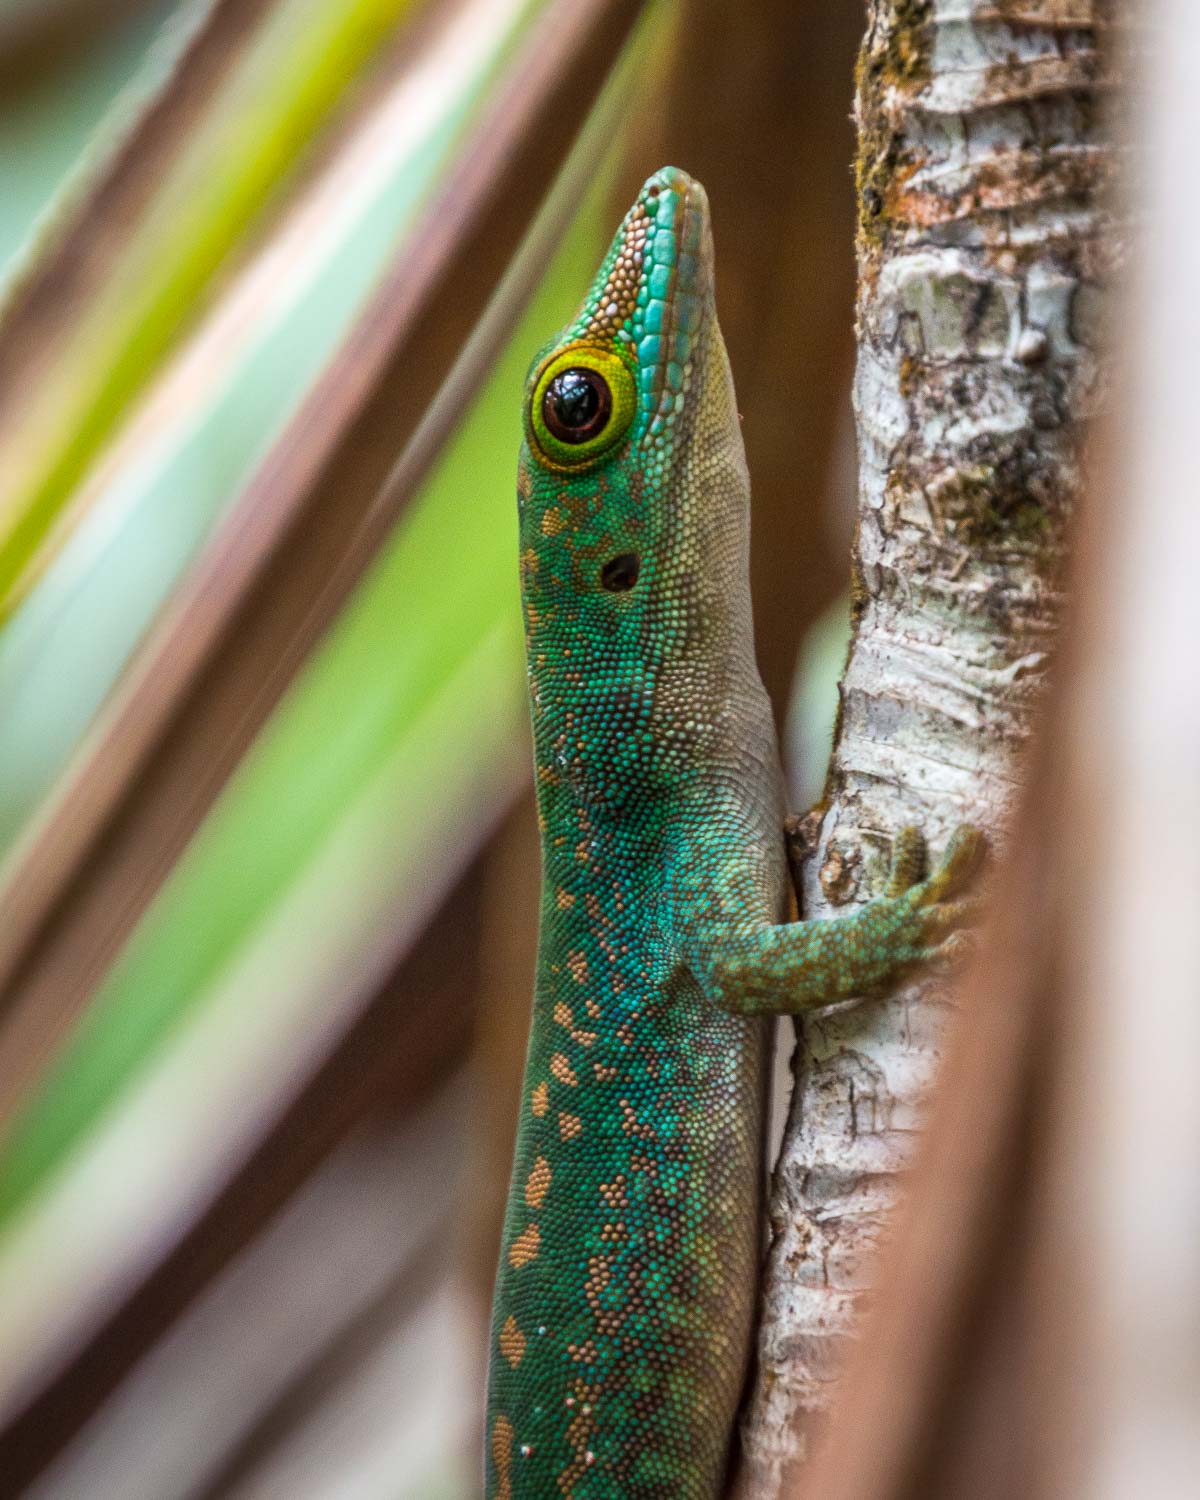 A colourful Seychelles Day Gecko holding onto a branch.